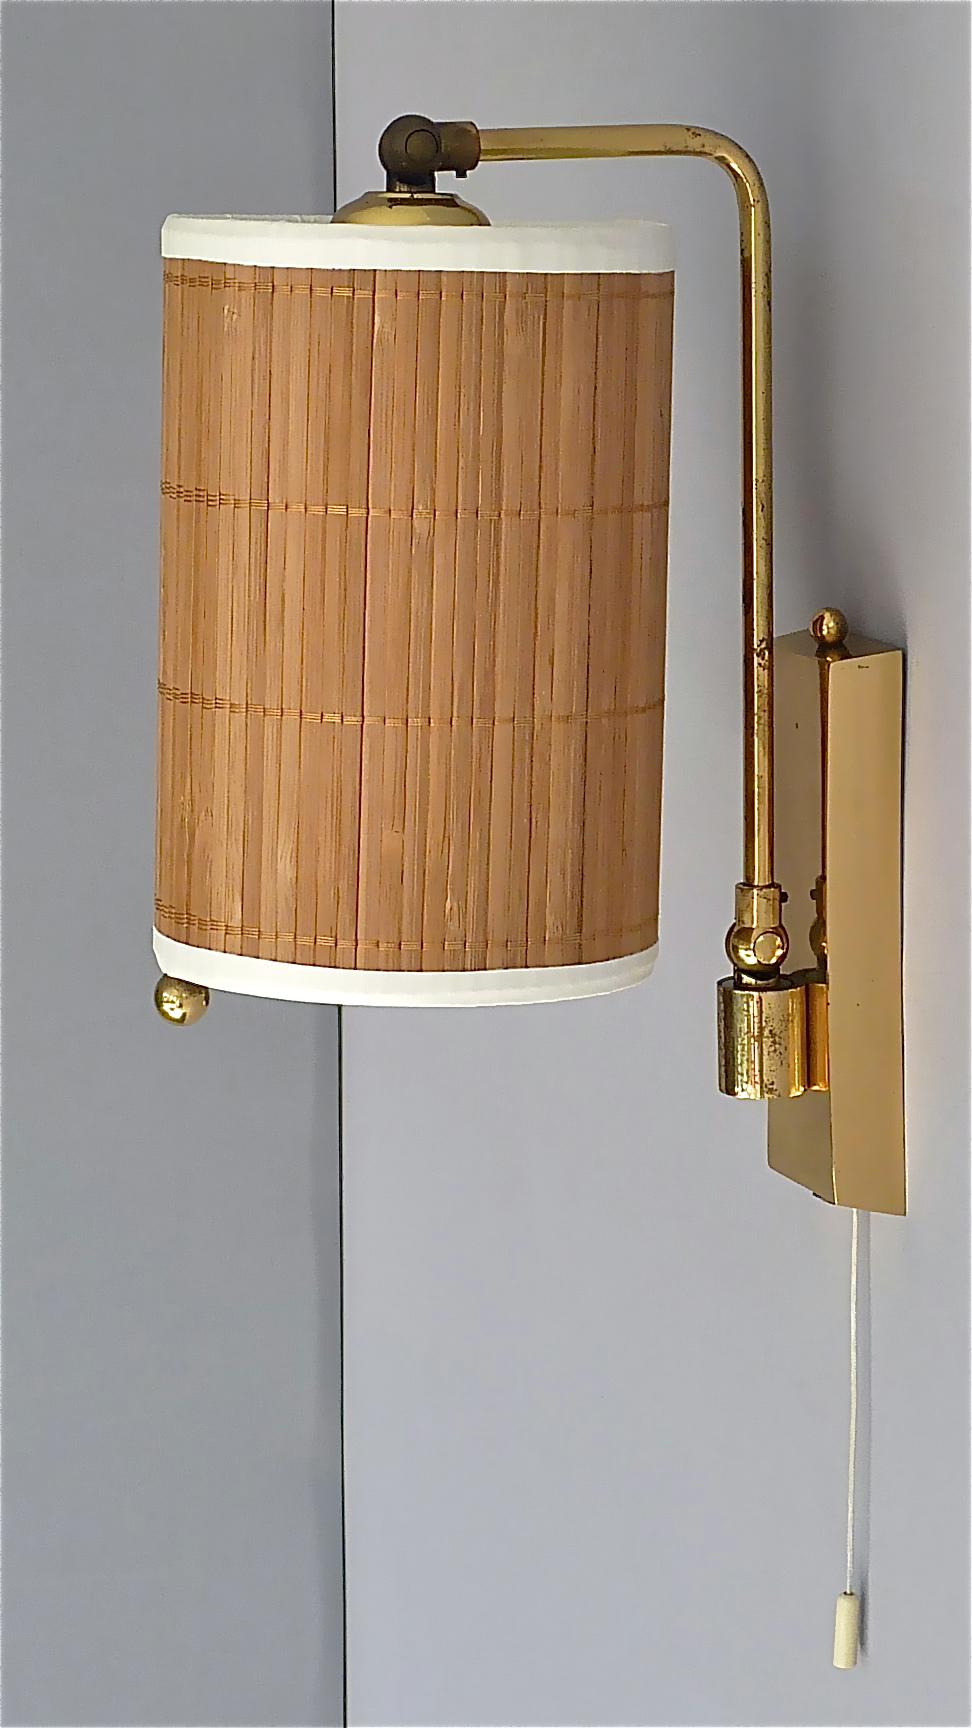 Scandinavian Modern Wall Lamp Paavo Tynell Taito Oy Kalmar Style Brass Cane Wood Shade 1950s Sconce For Sale